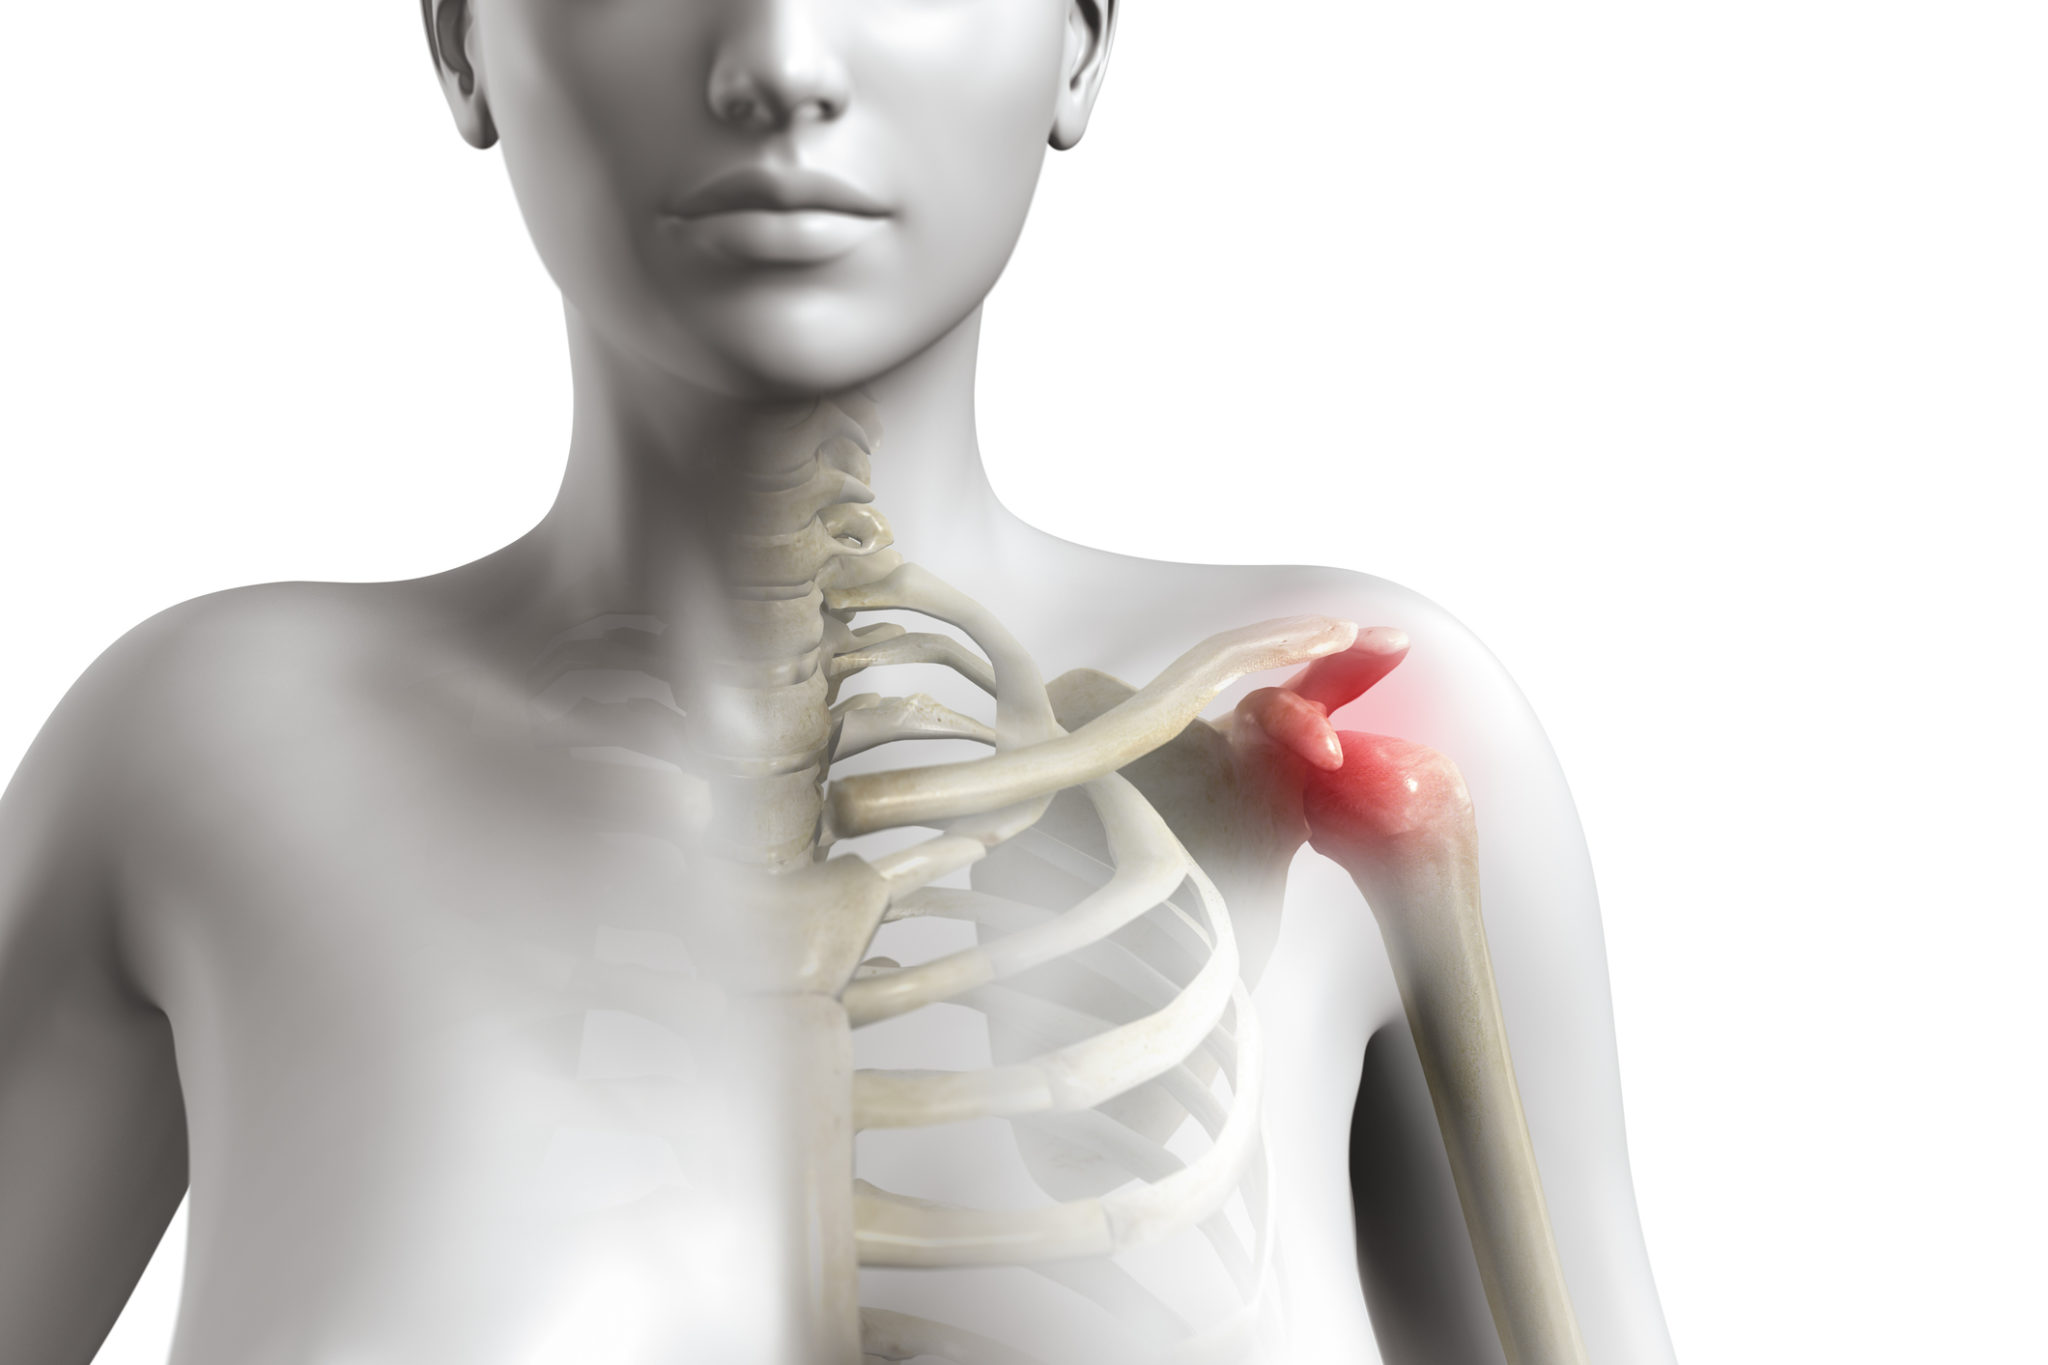 Rotator Cuff Tear: When to Repair and When to Smooth and Move the Shoulder